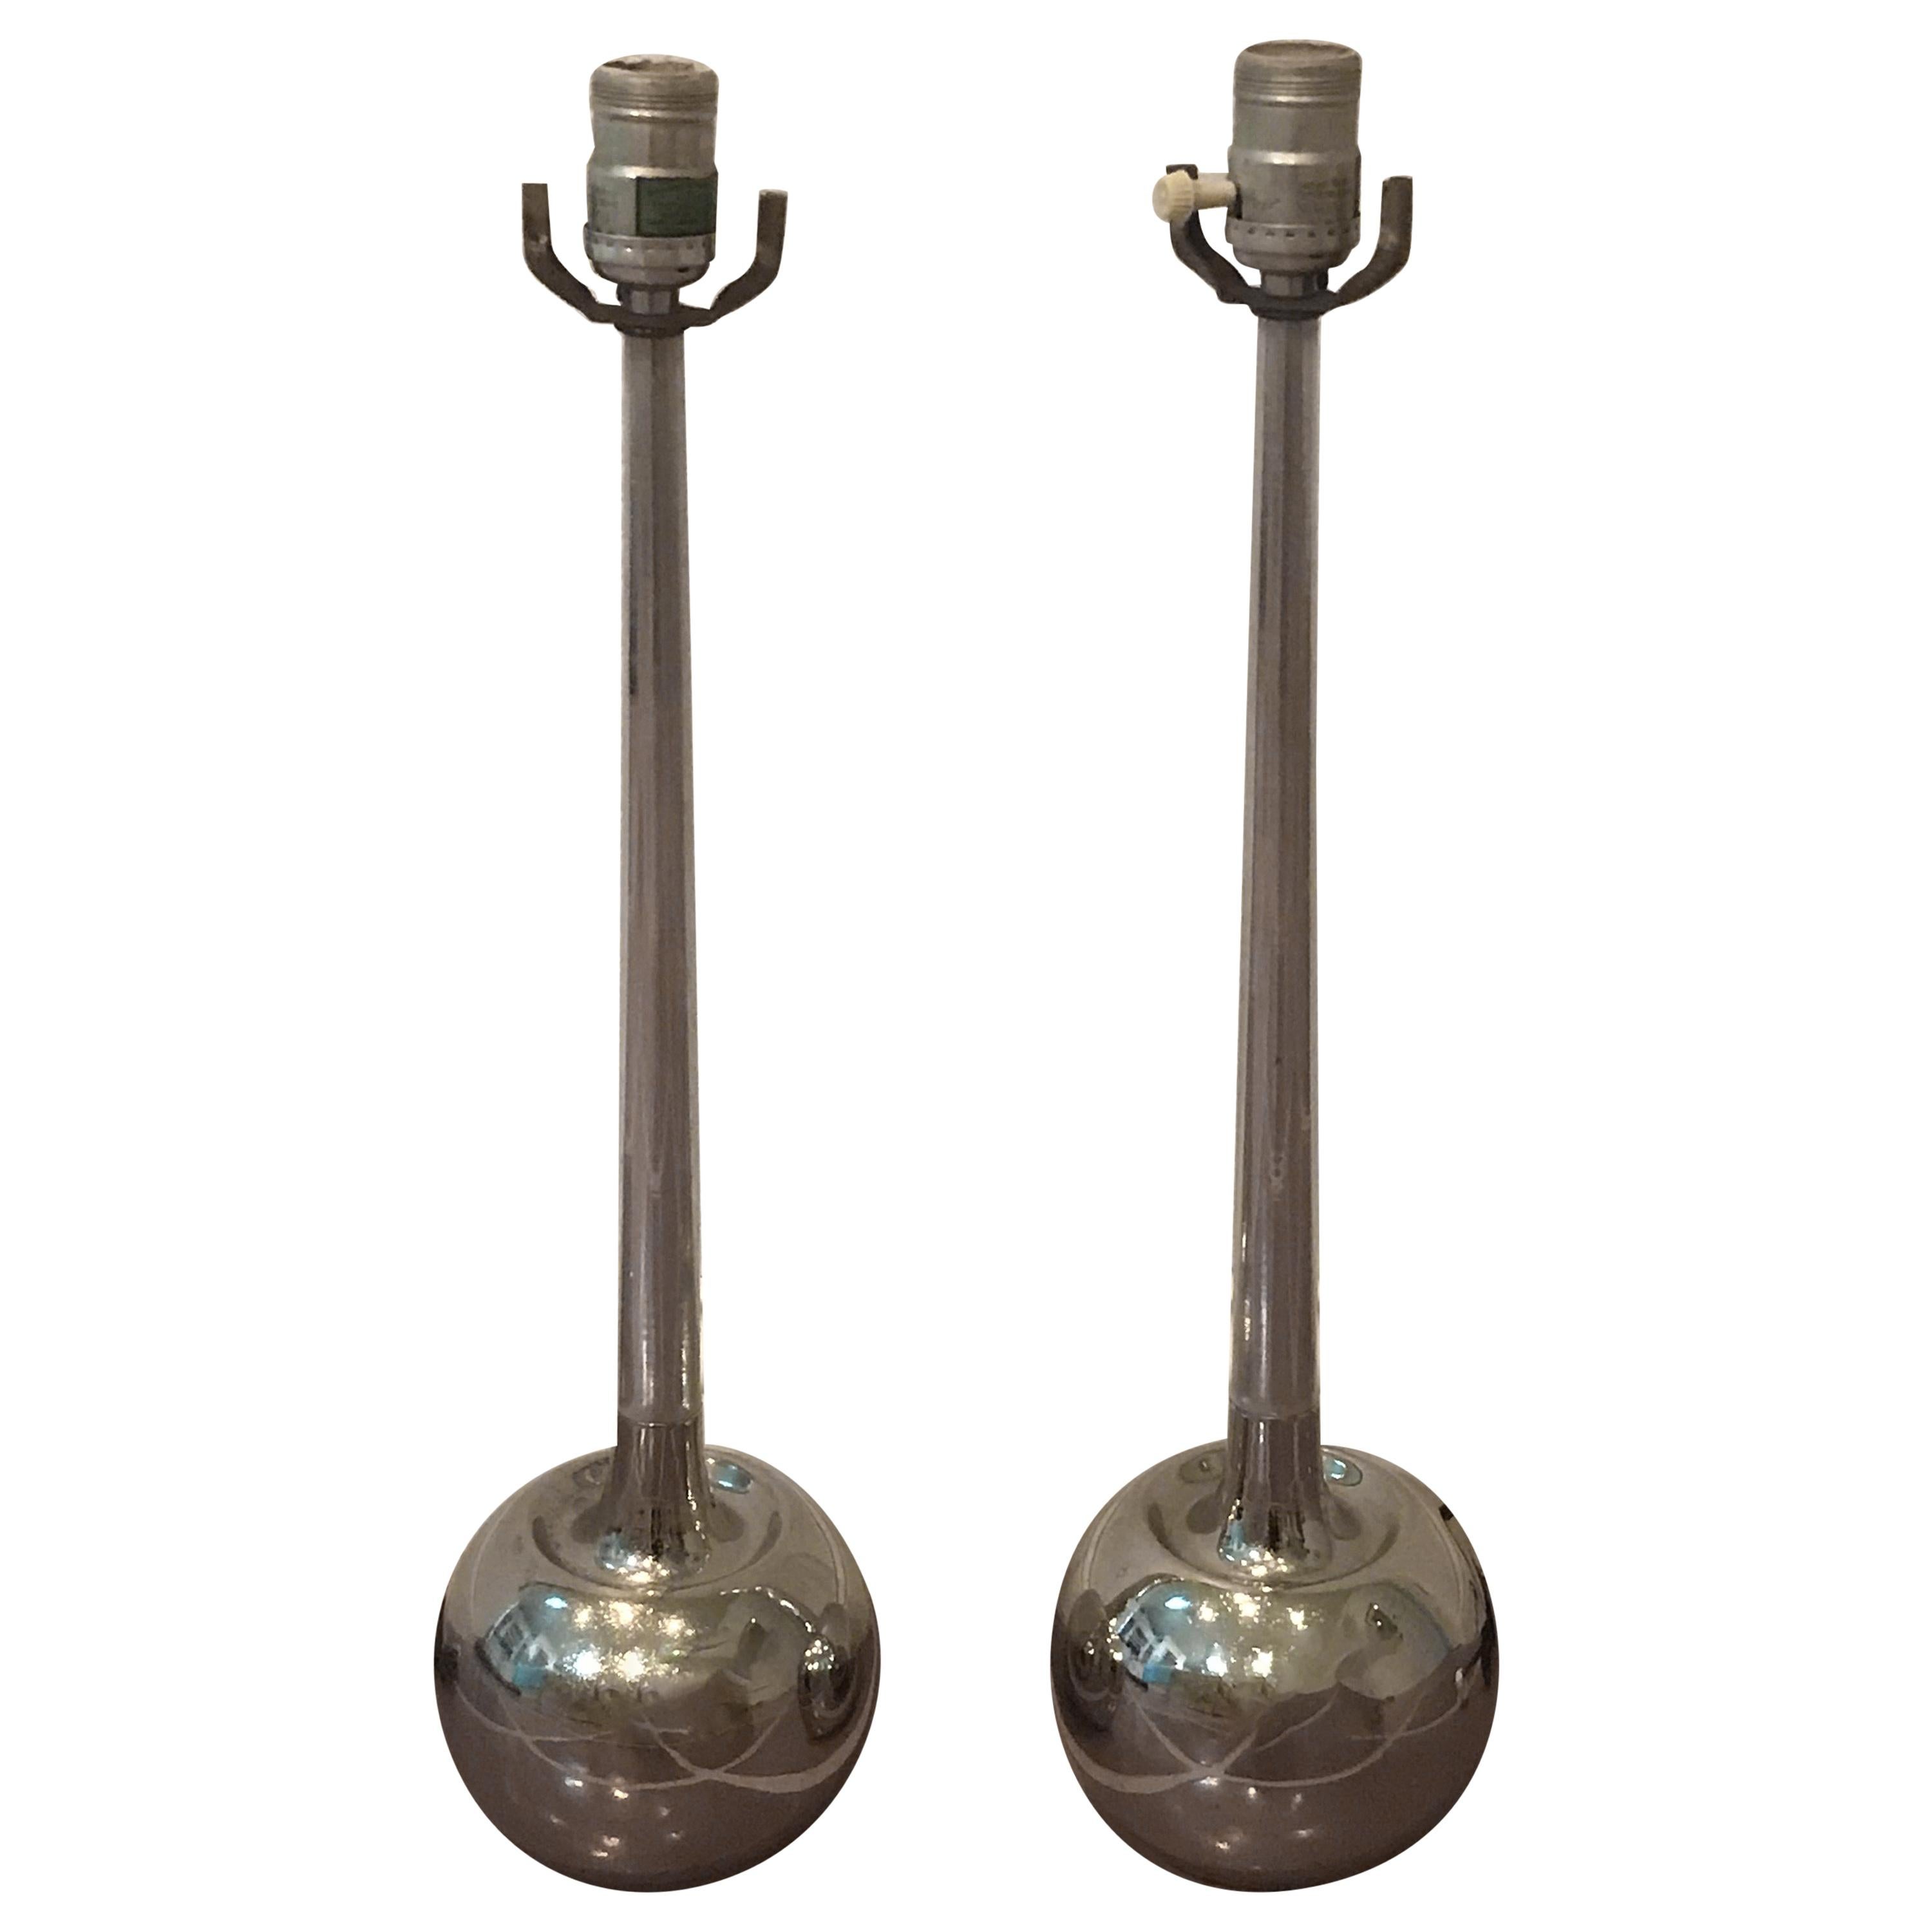 Pair of Vintage Chrome Ball Table Lamps by Laurel